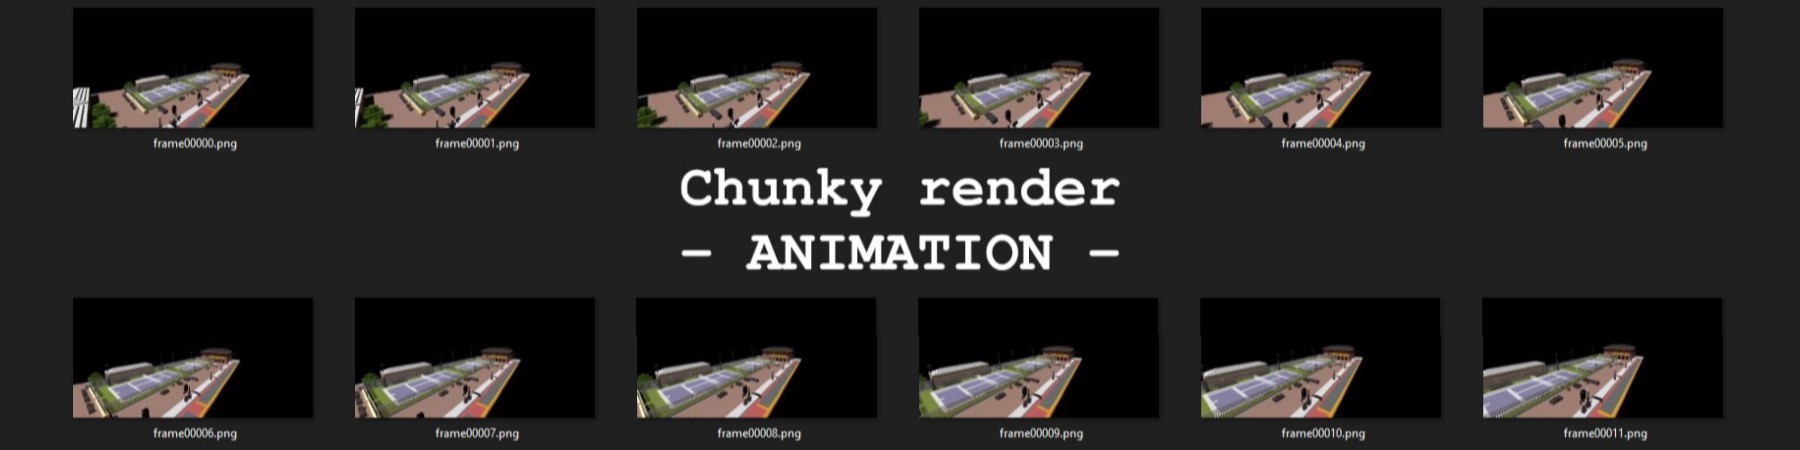 chunky poster thumb render animation